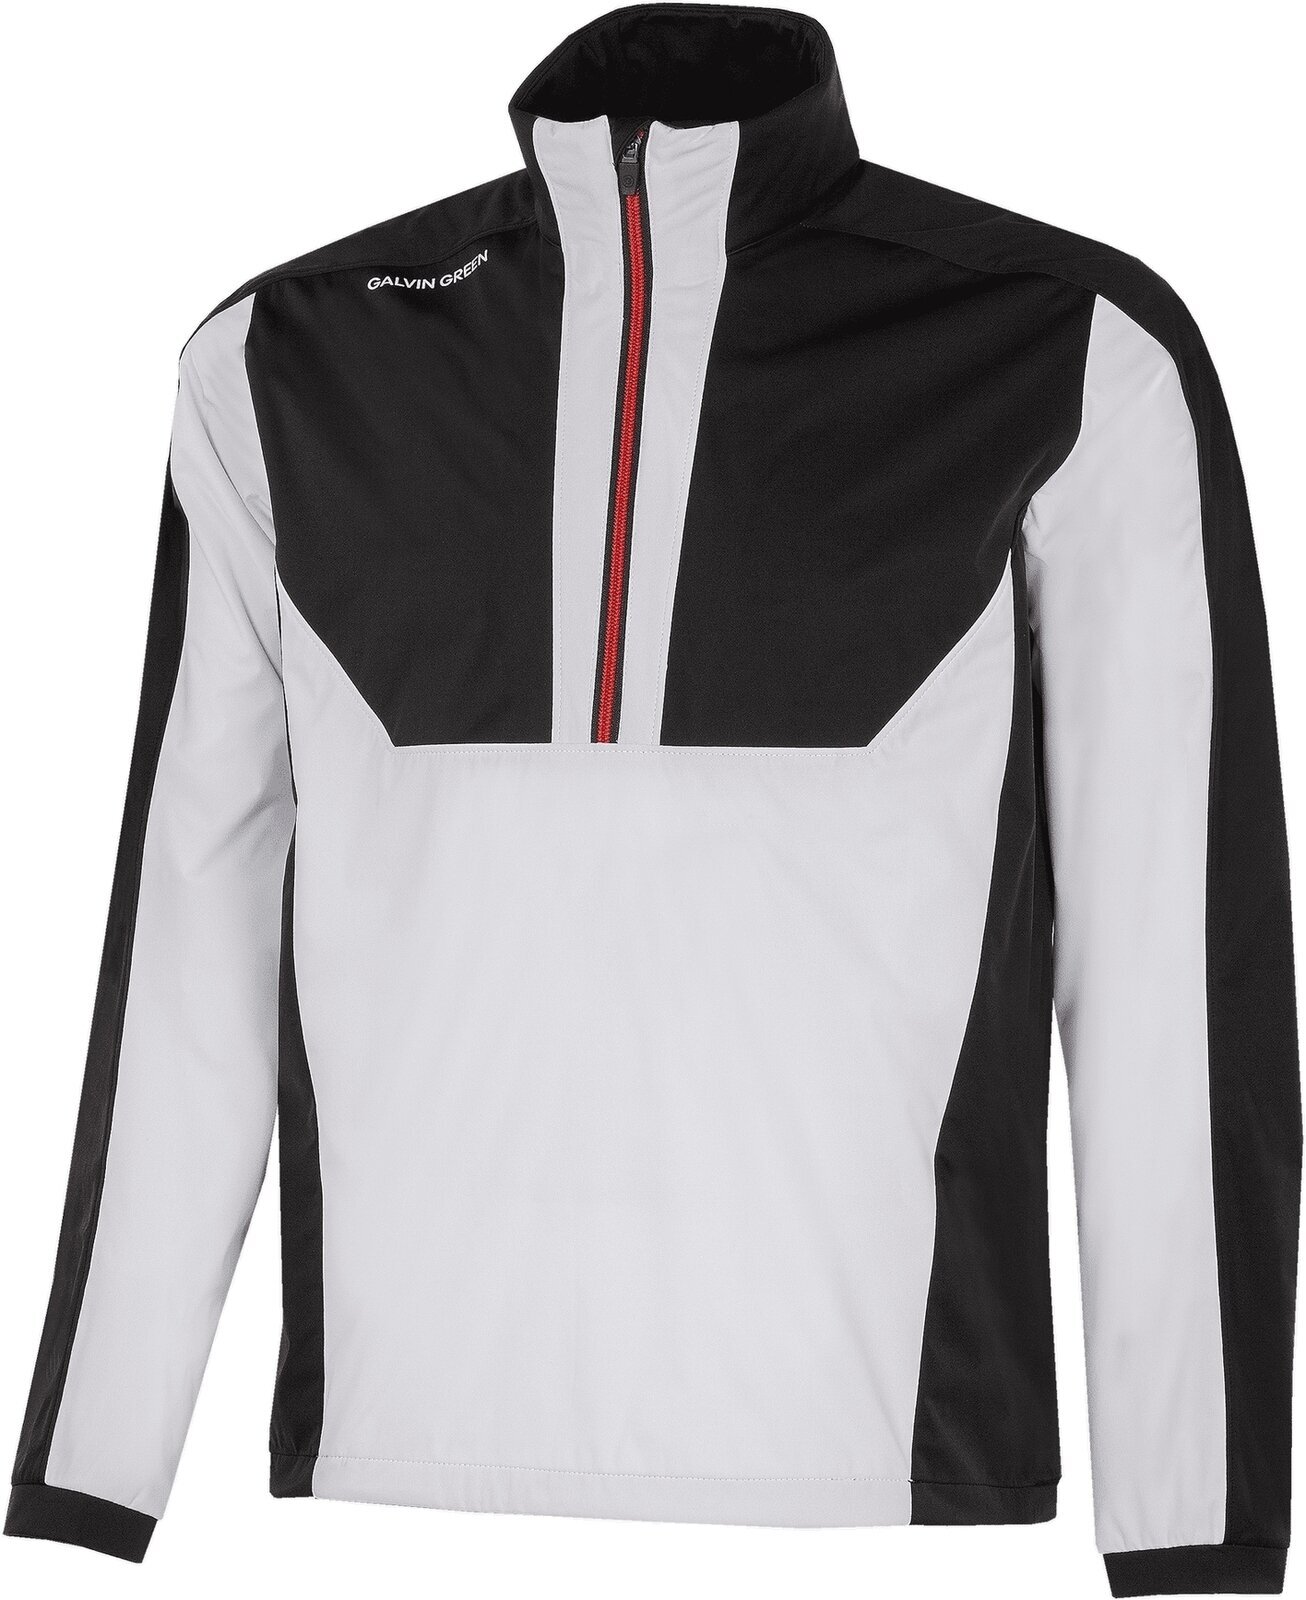 Jasje Galvin Green Lawrence Mens Windproof And Water Repellent Jacket White/Black/Red M